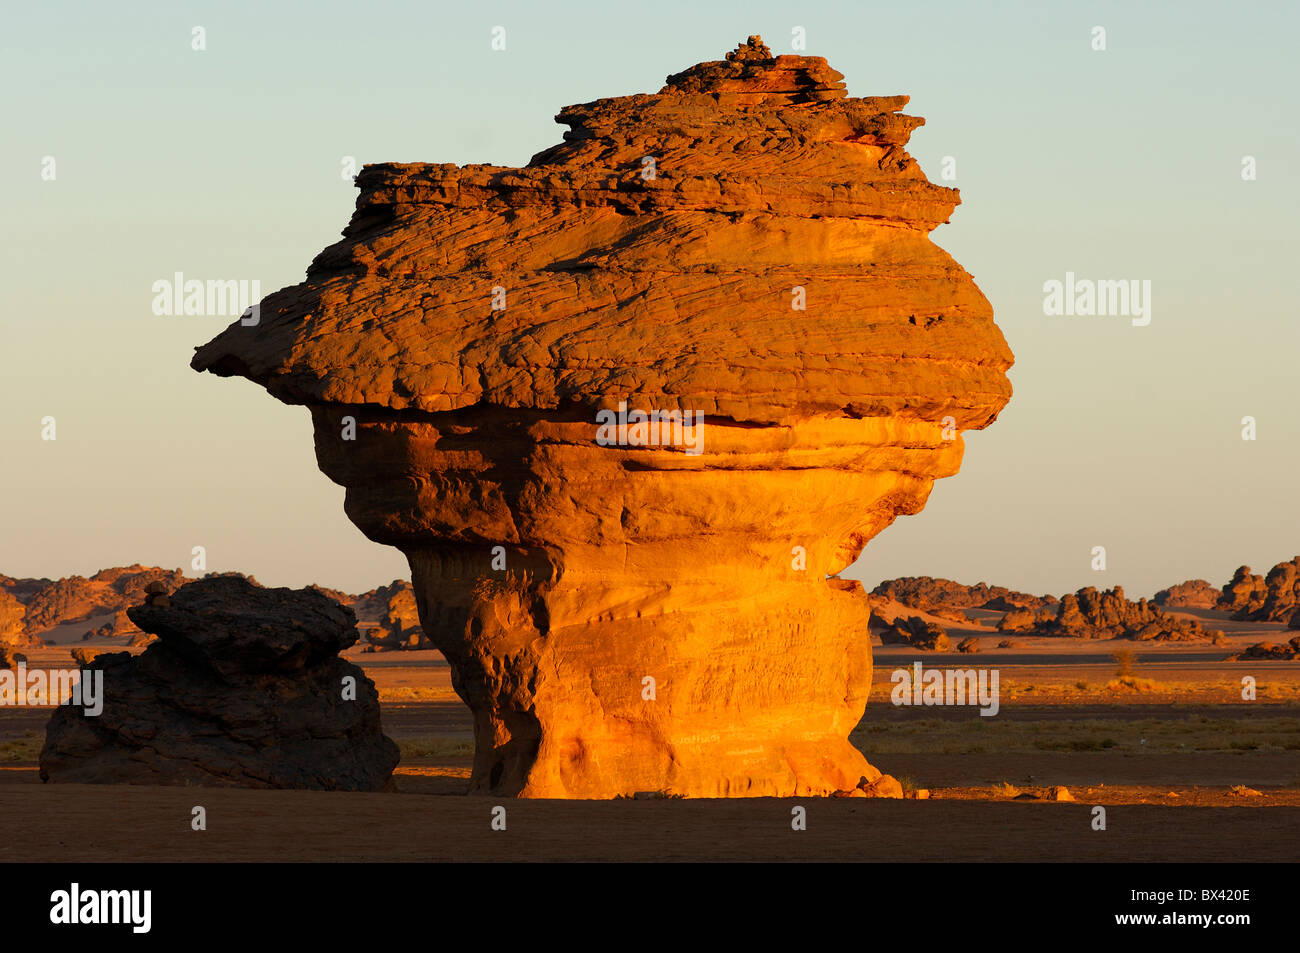 Morning light on bizarre rock formations in the Acacus mountains, Libya Stock Photo